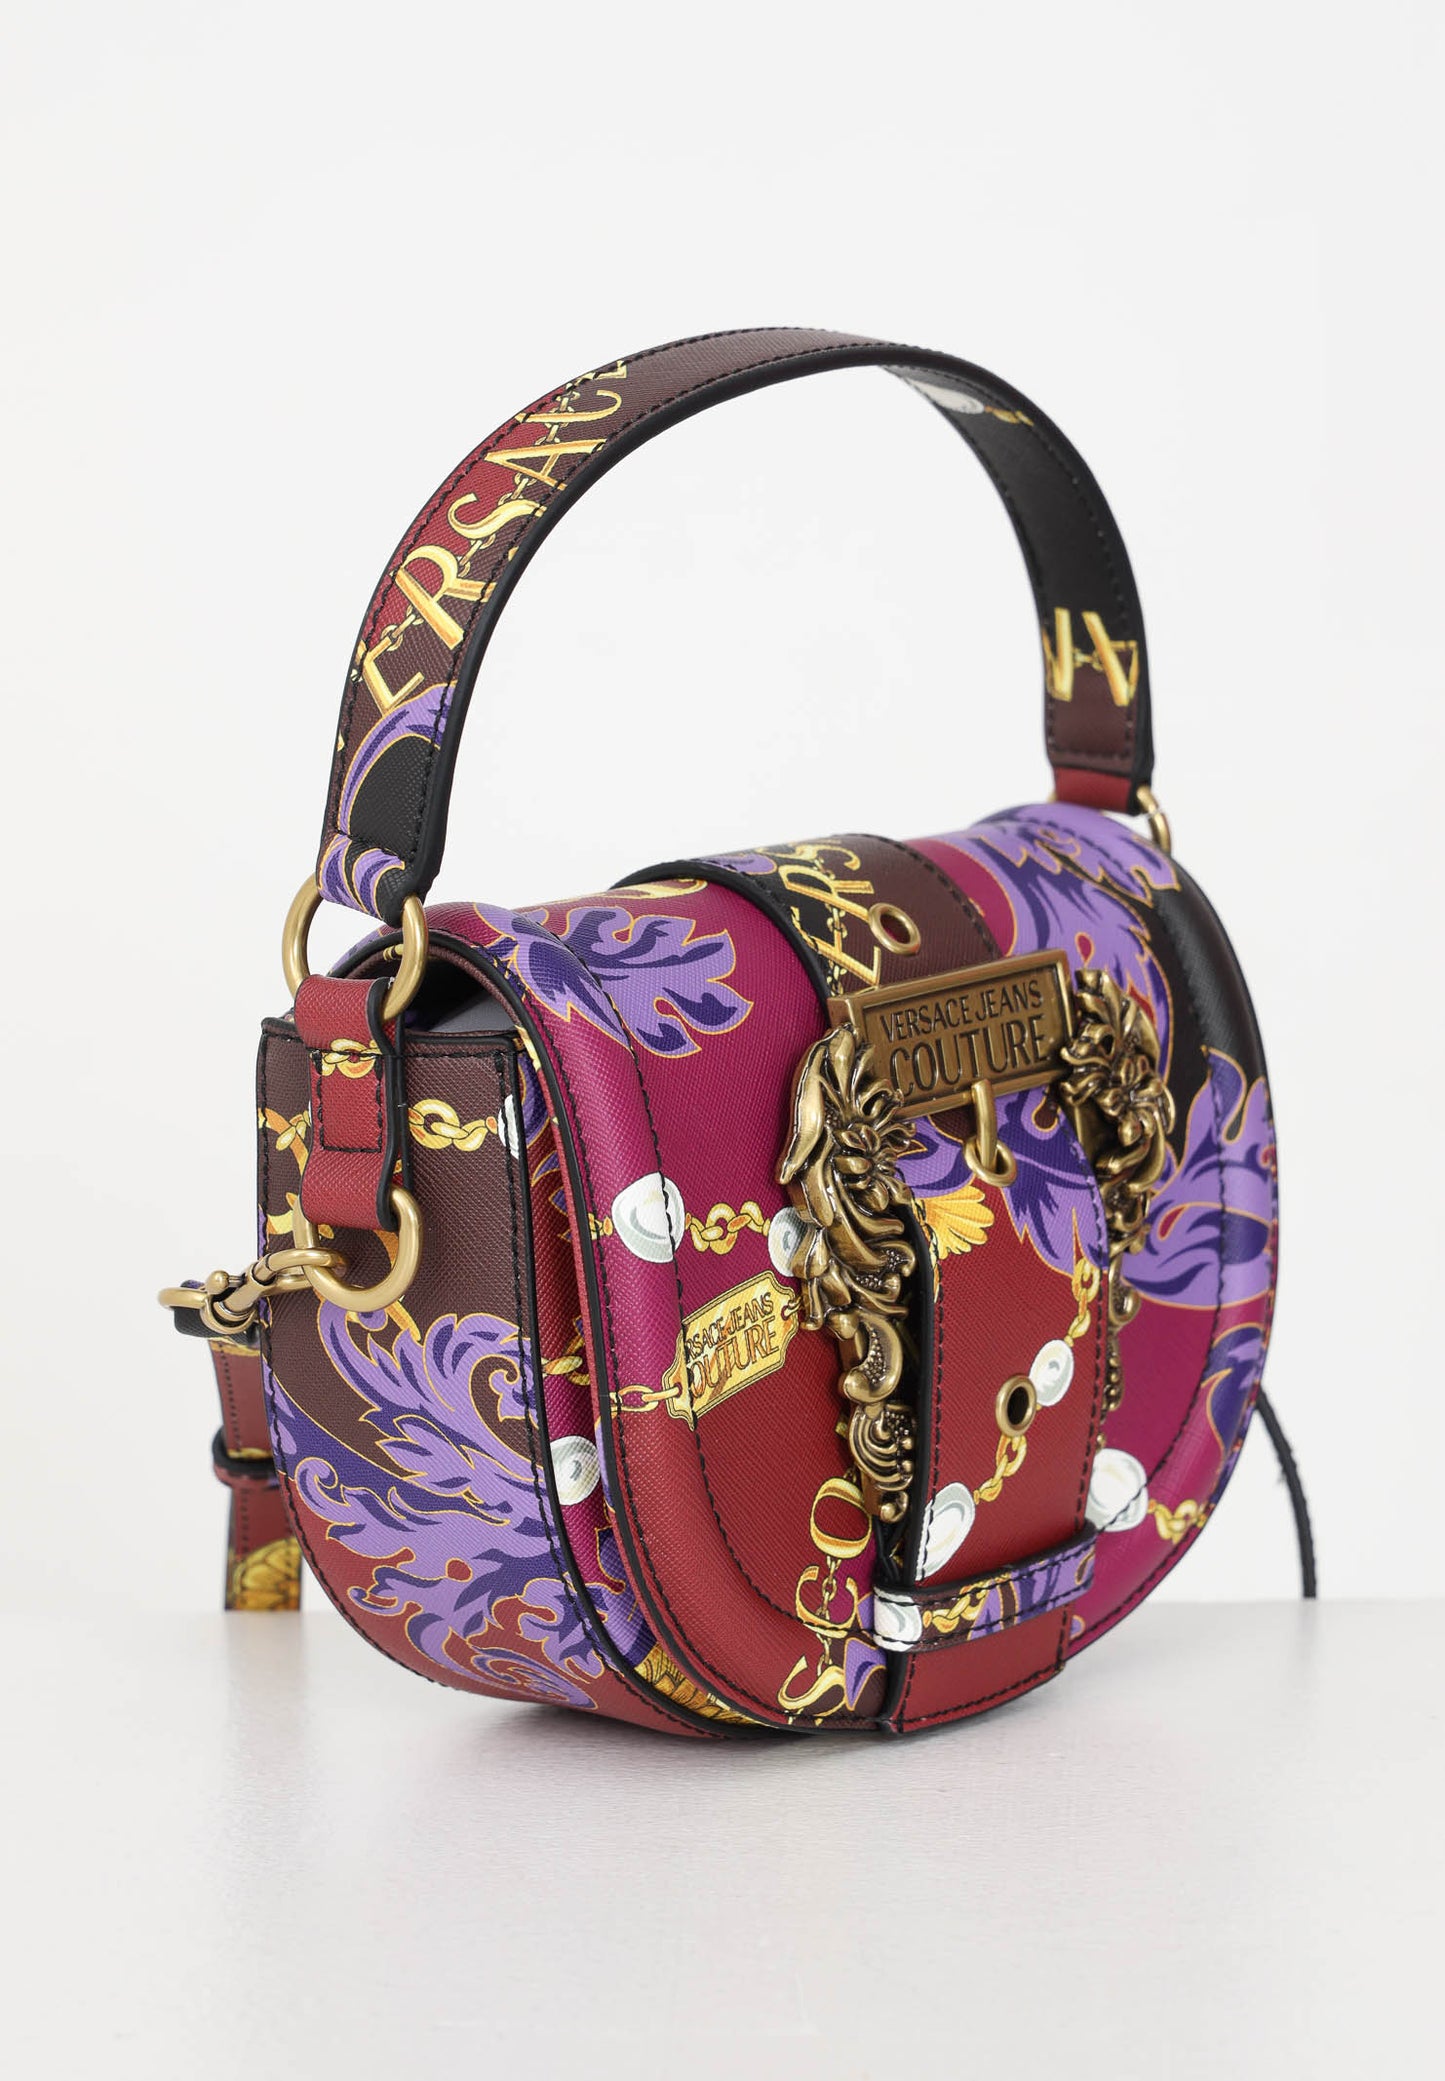 Versace Jeans Couture bag in saffiano synthetic leather